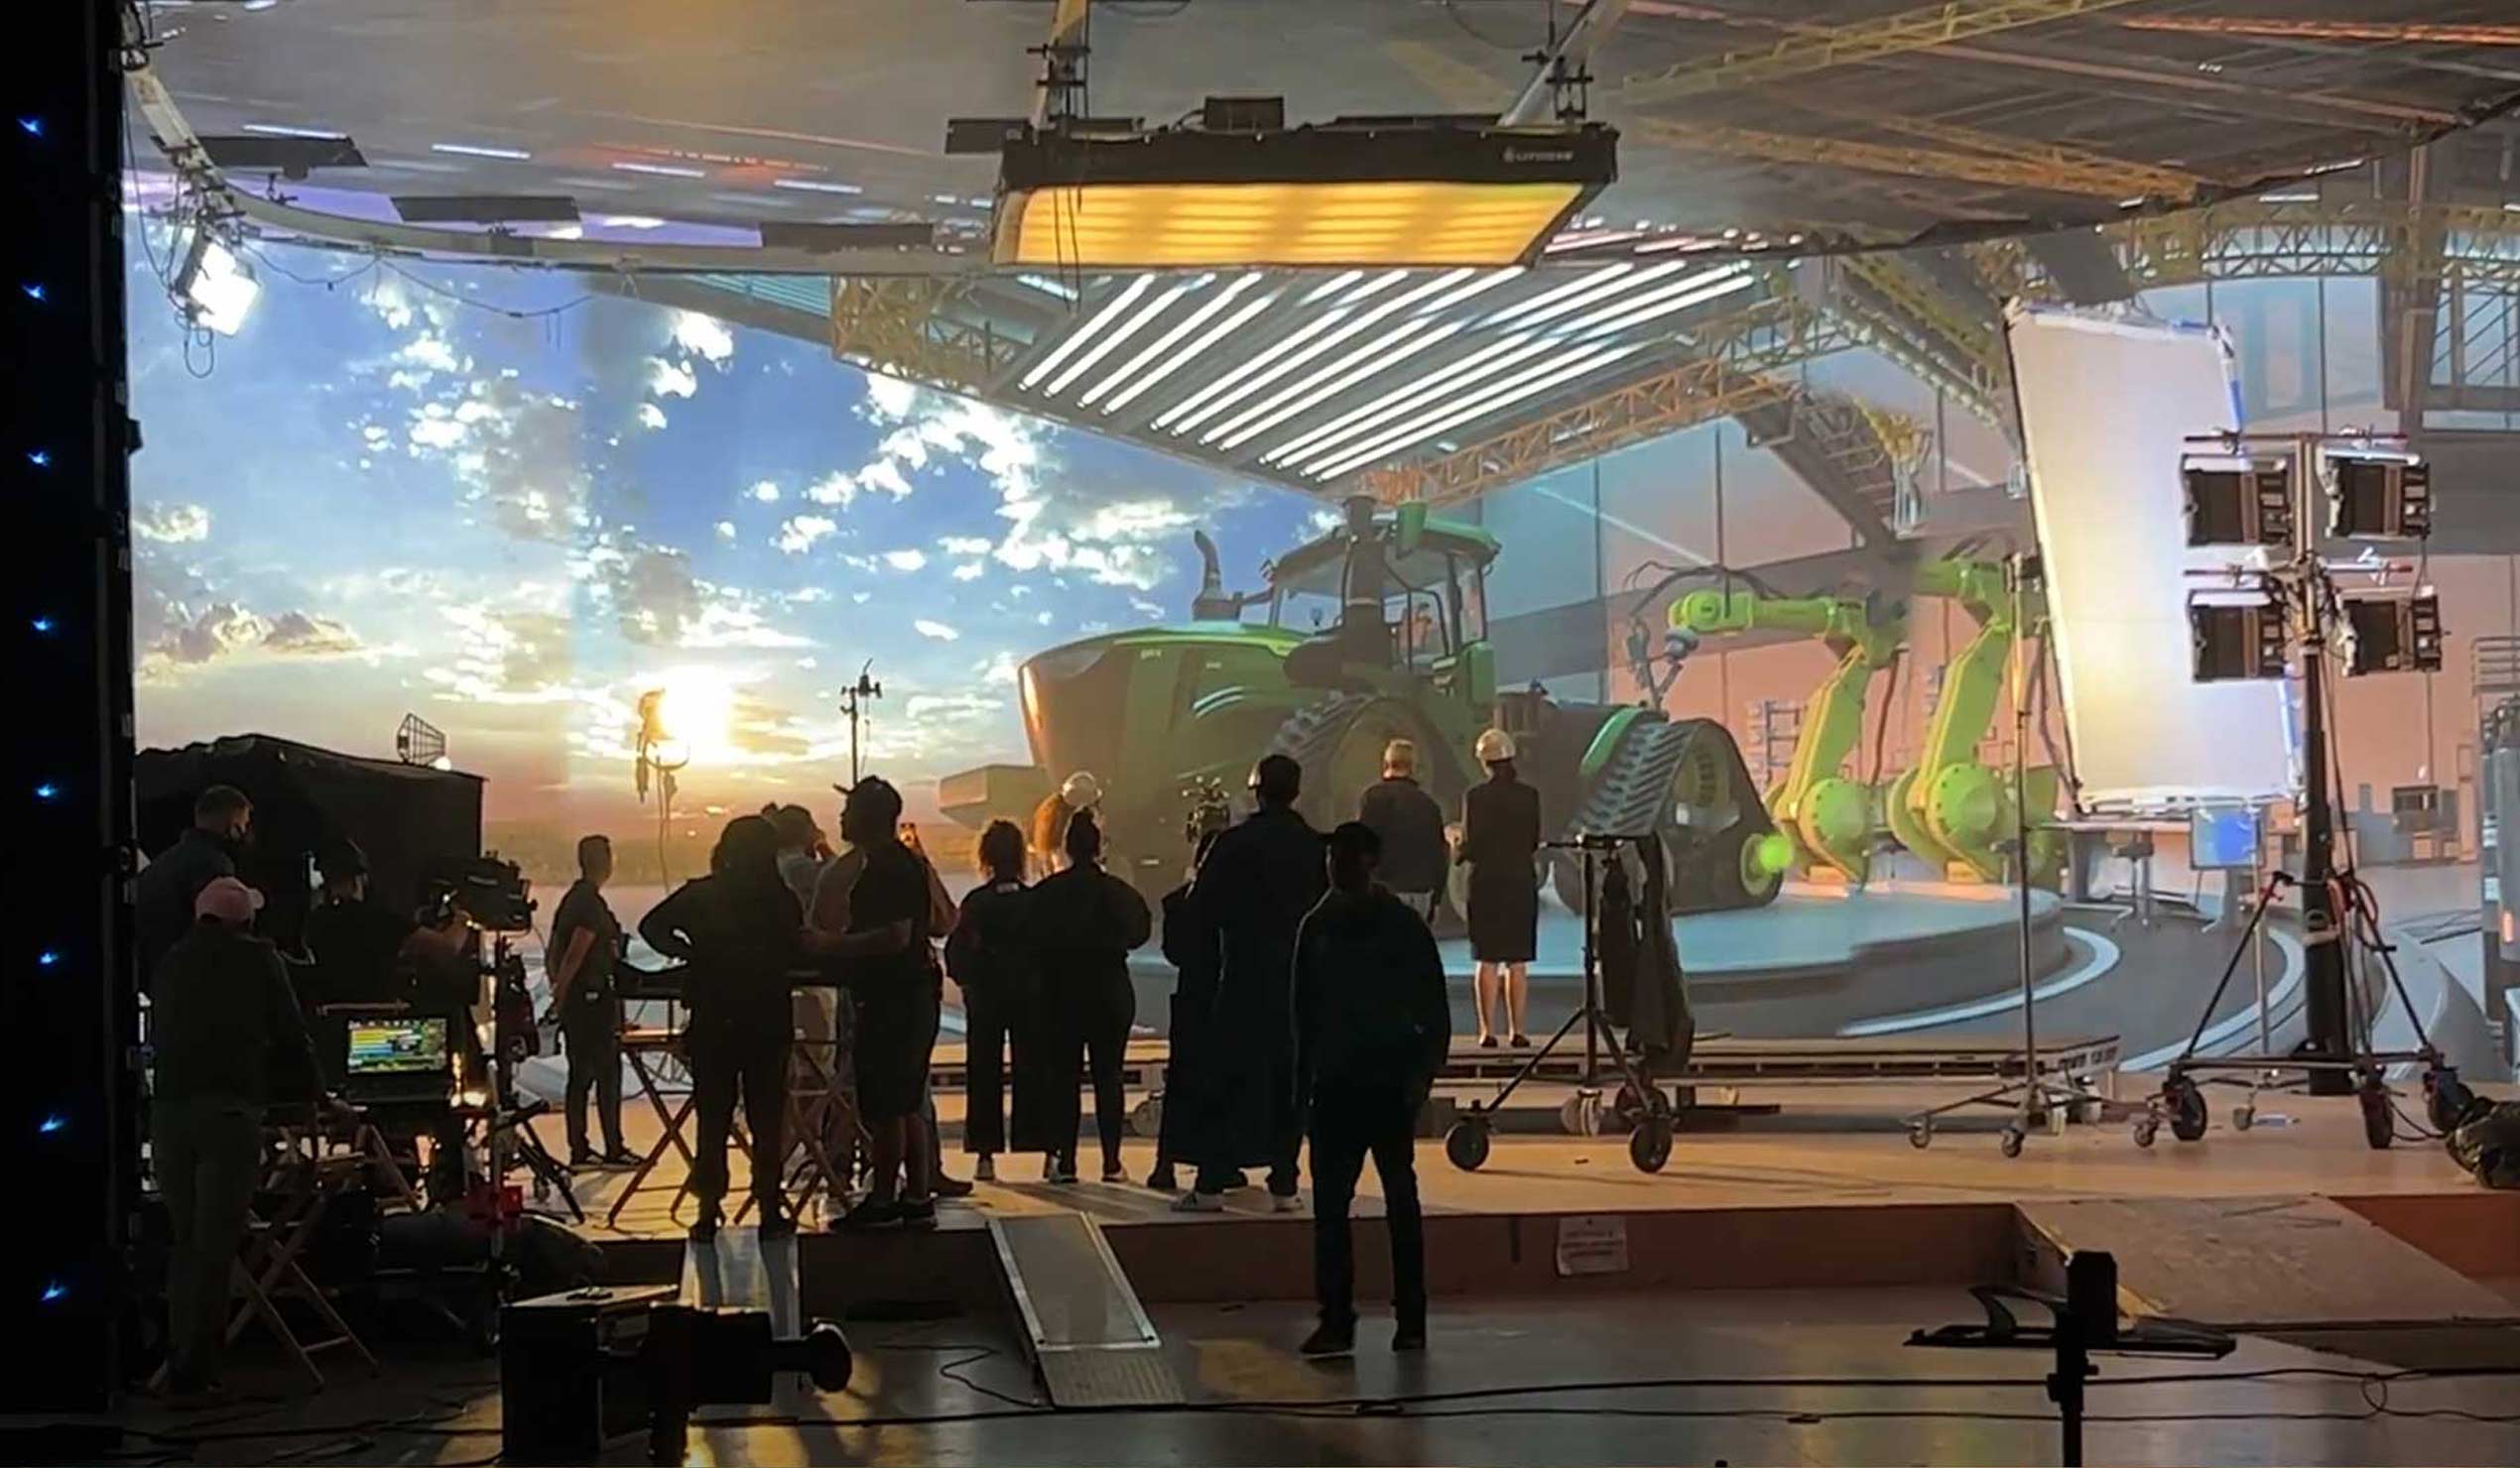 Behind the scenes view shooting on Volume stage with a large John Deere tractor in the background and many crew member silhouetted in the foreground.